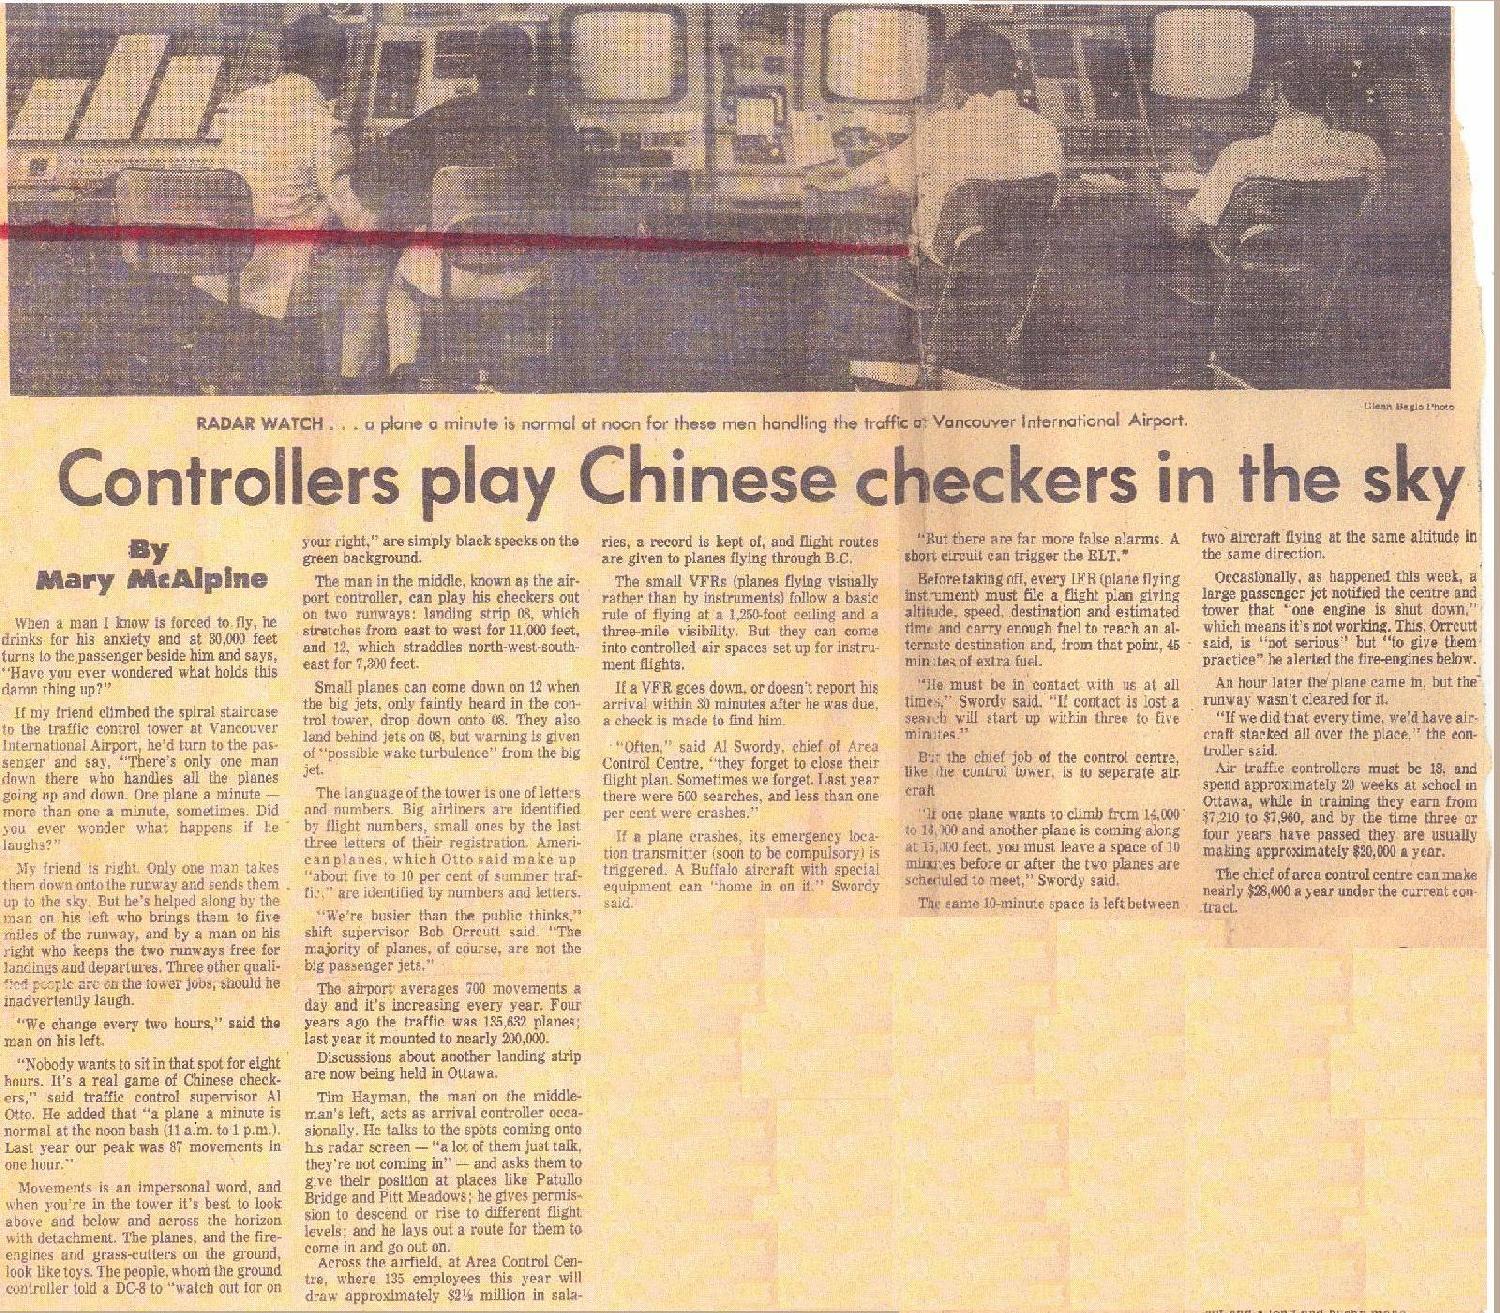 1967 - Vancouver Sun article (left mouse click for large image)